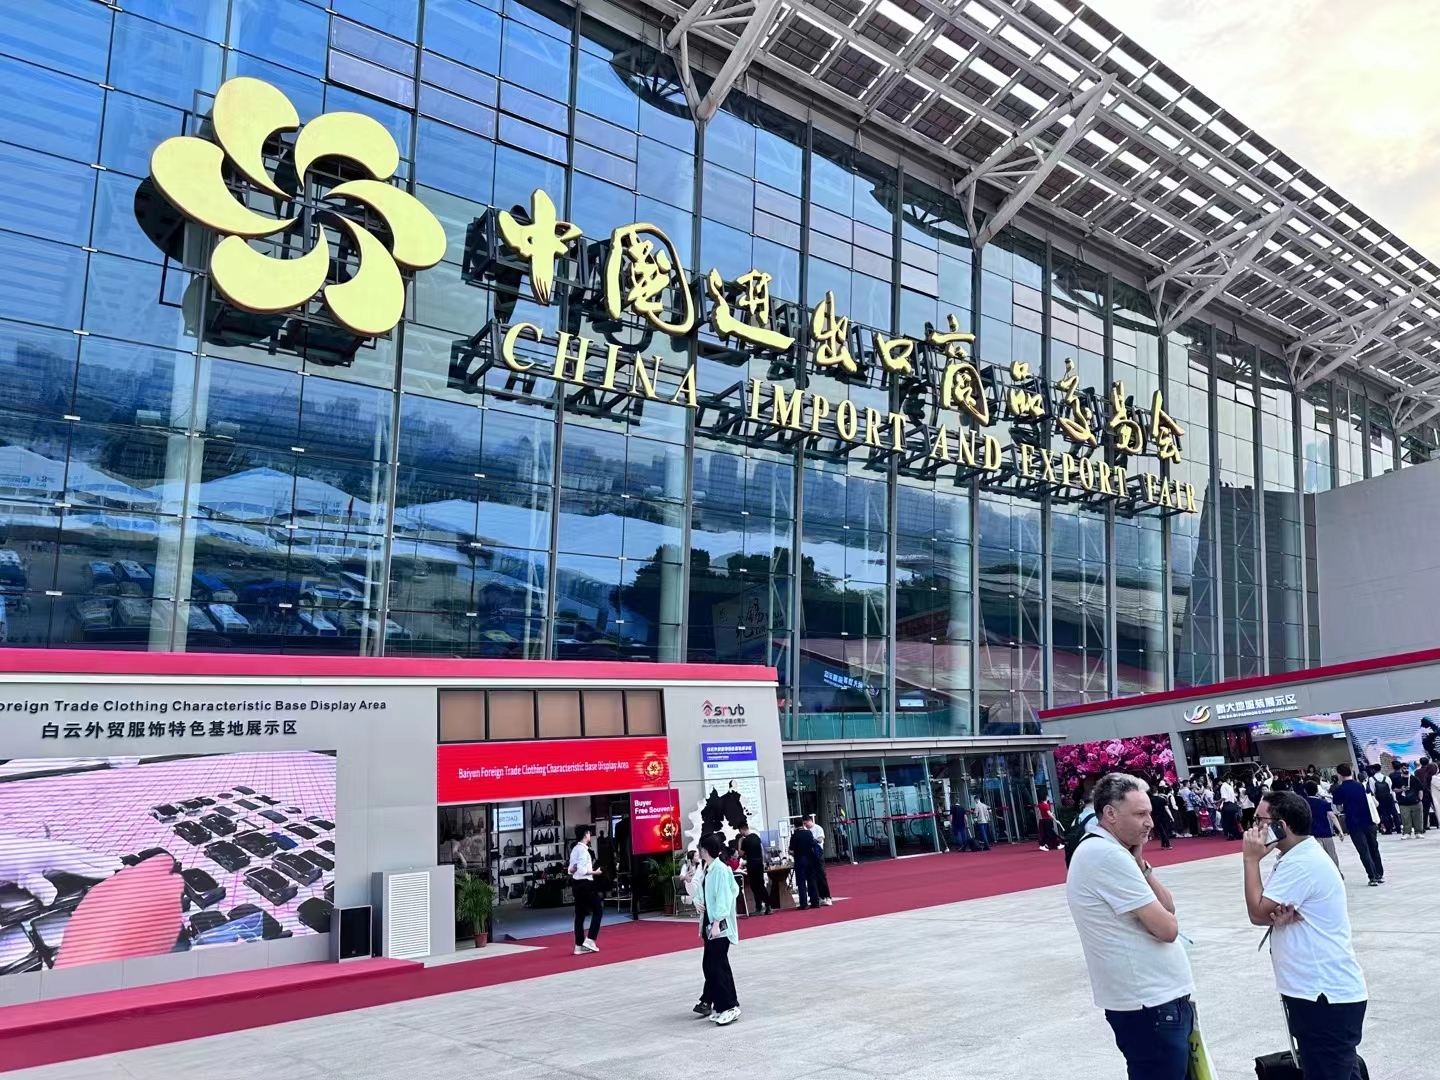 A Successful 5-Day Run at the Canton Fair – Unprecedented Interest in Our Products